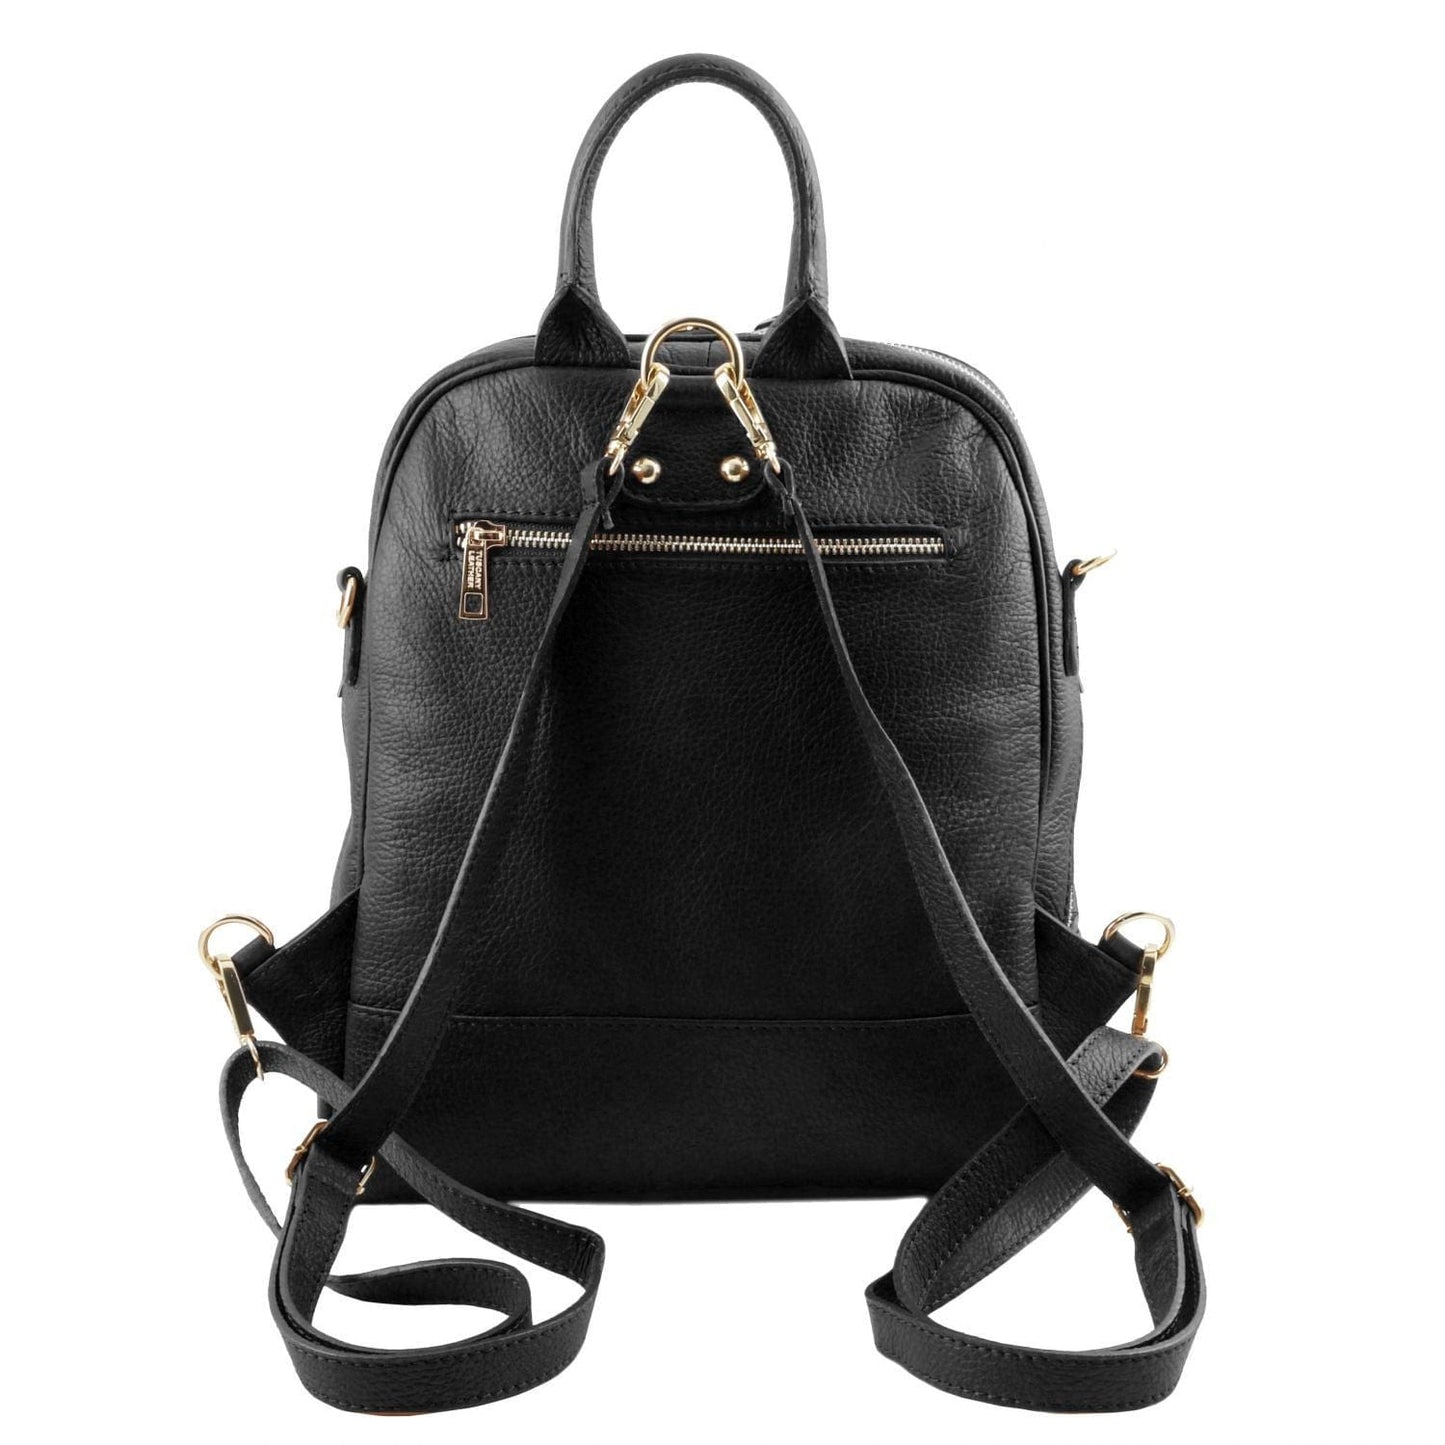 TL Bag - Soft leather backpack for women | TL141376 - Premium Leather backpacks for women - Shop now at San Rocco Italia